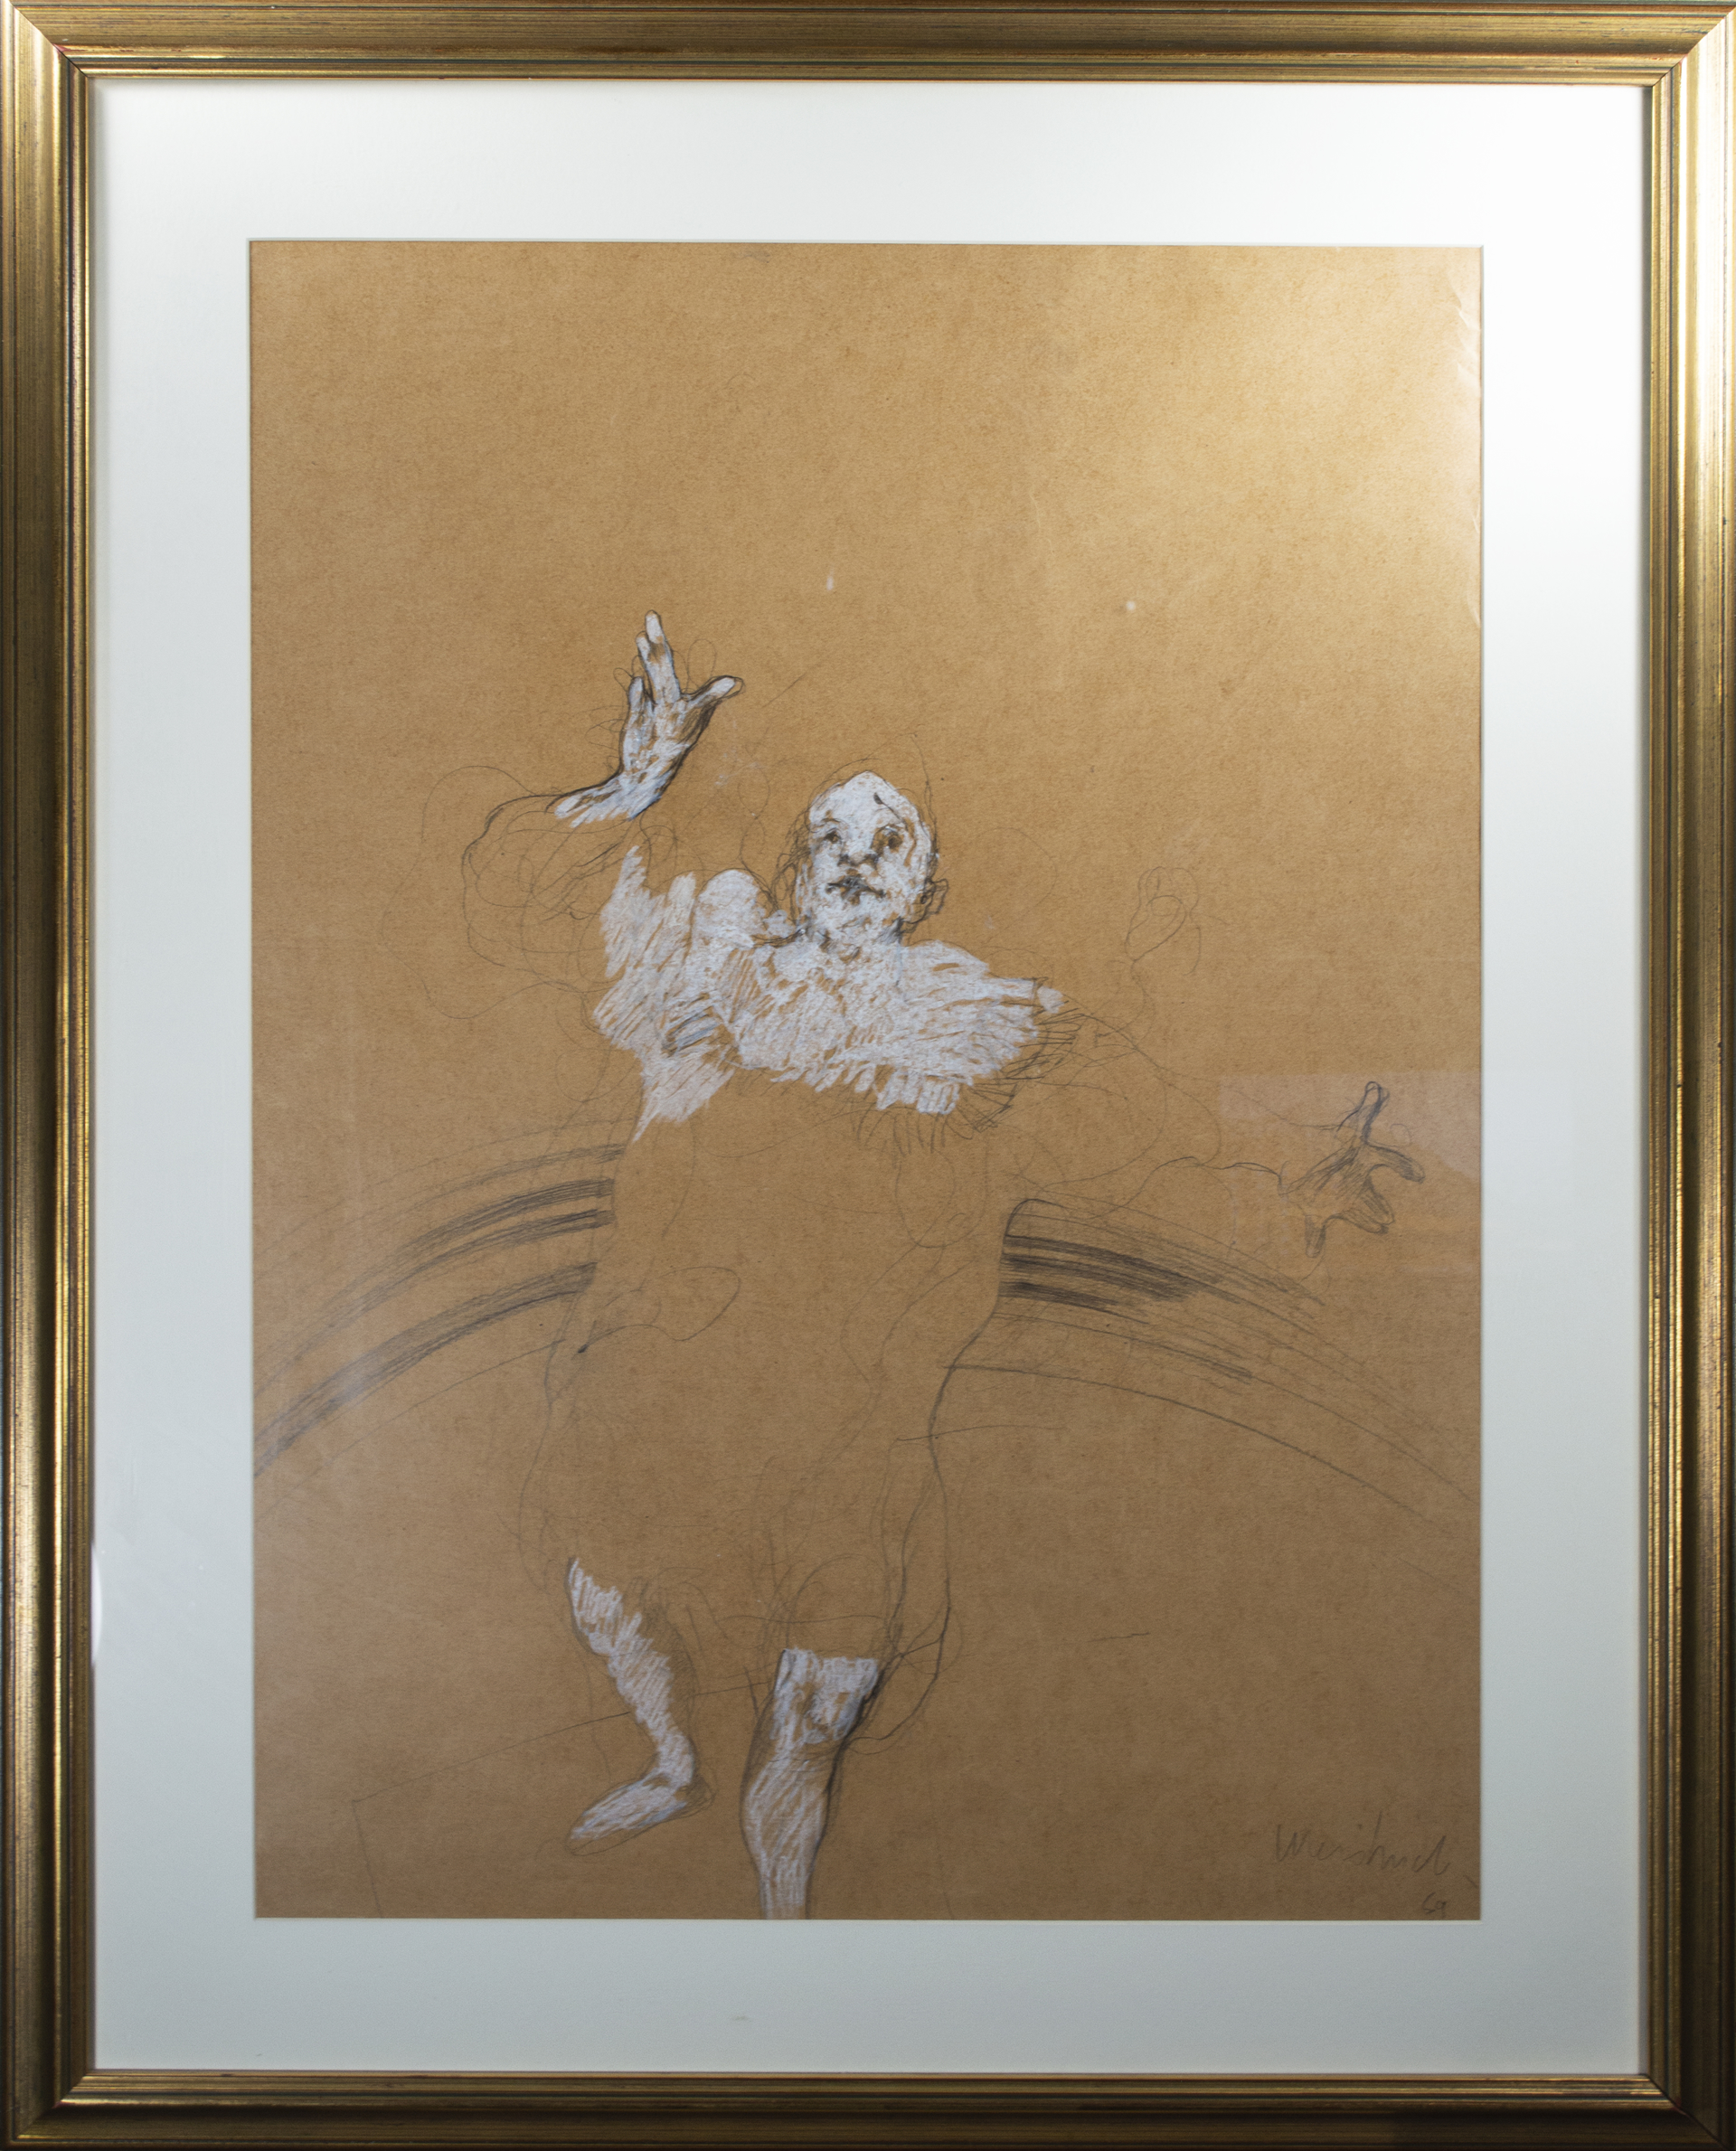 Clown, on butcher like paper by Claude Weisbuch